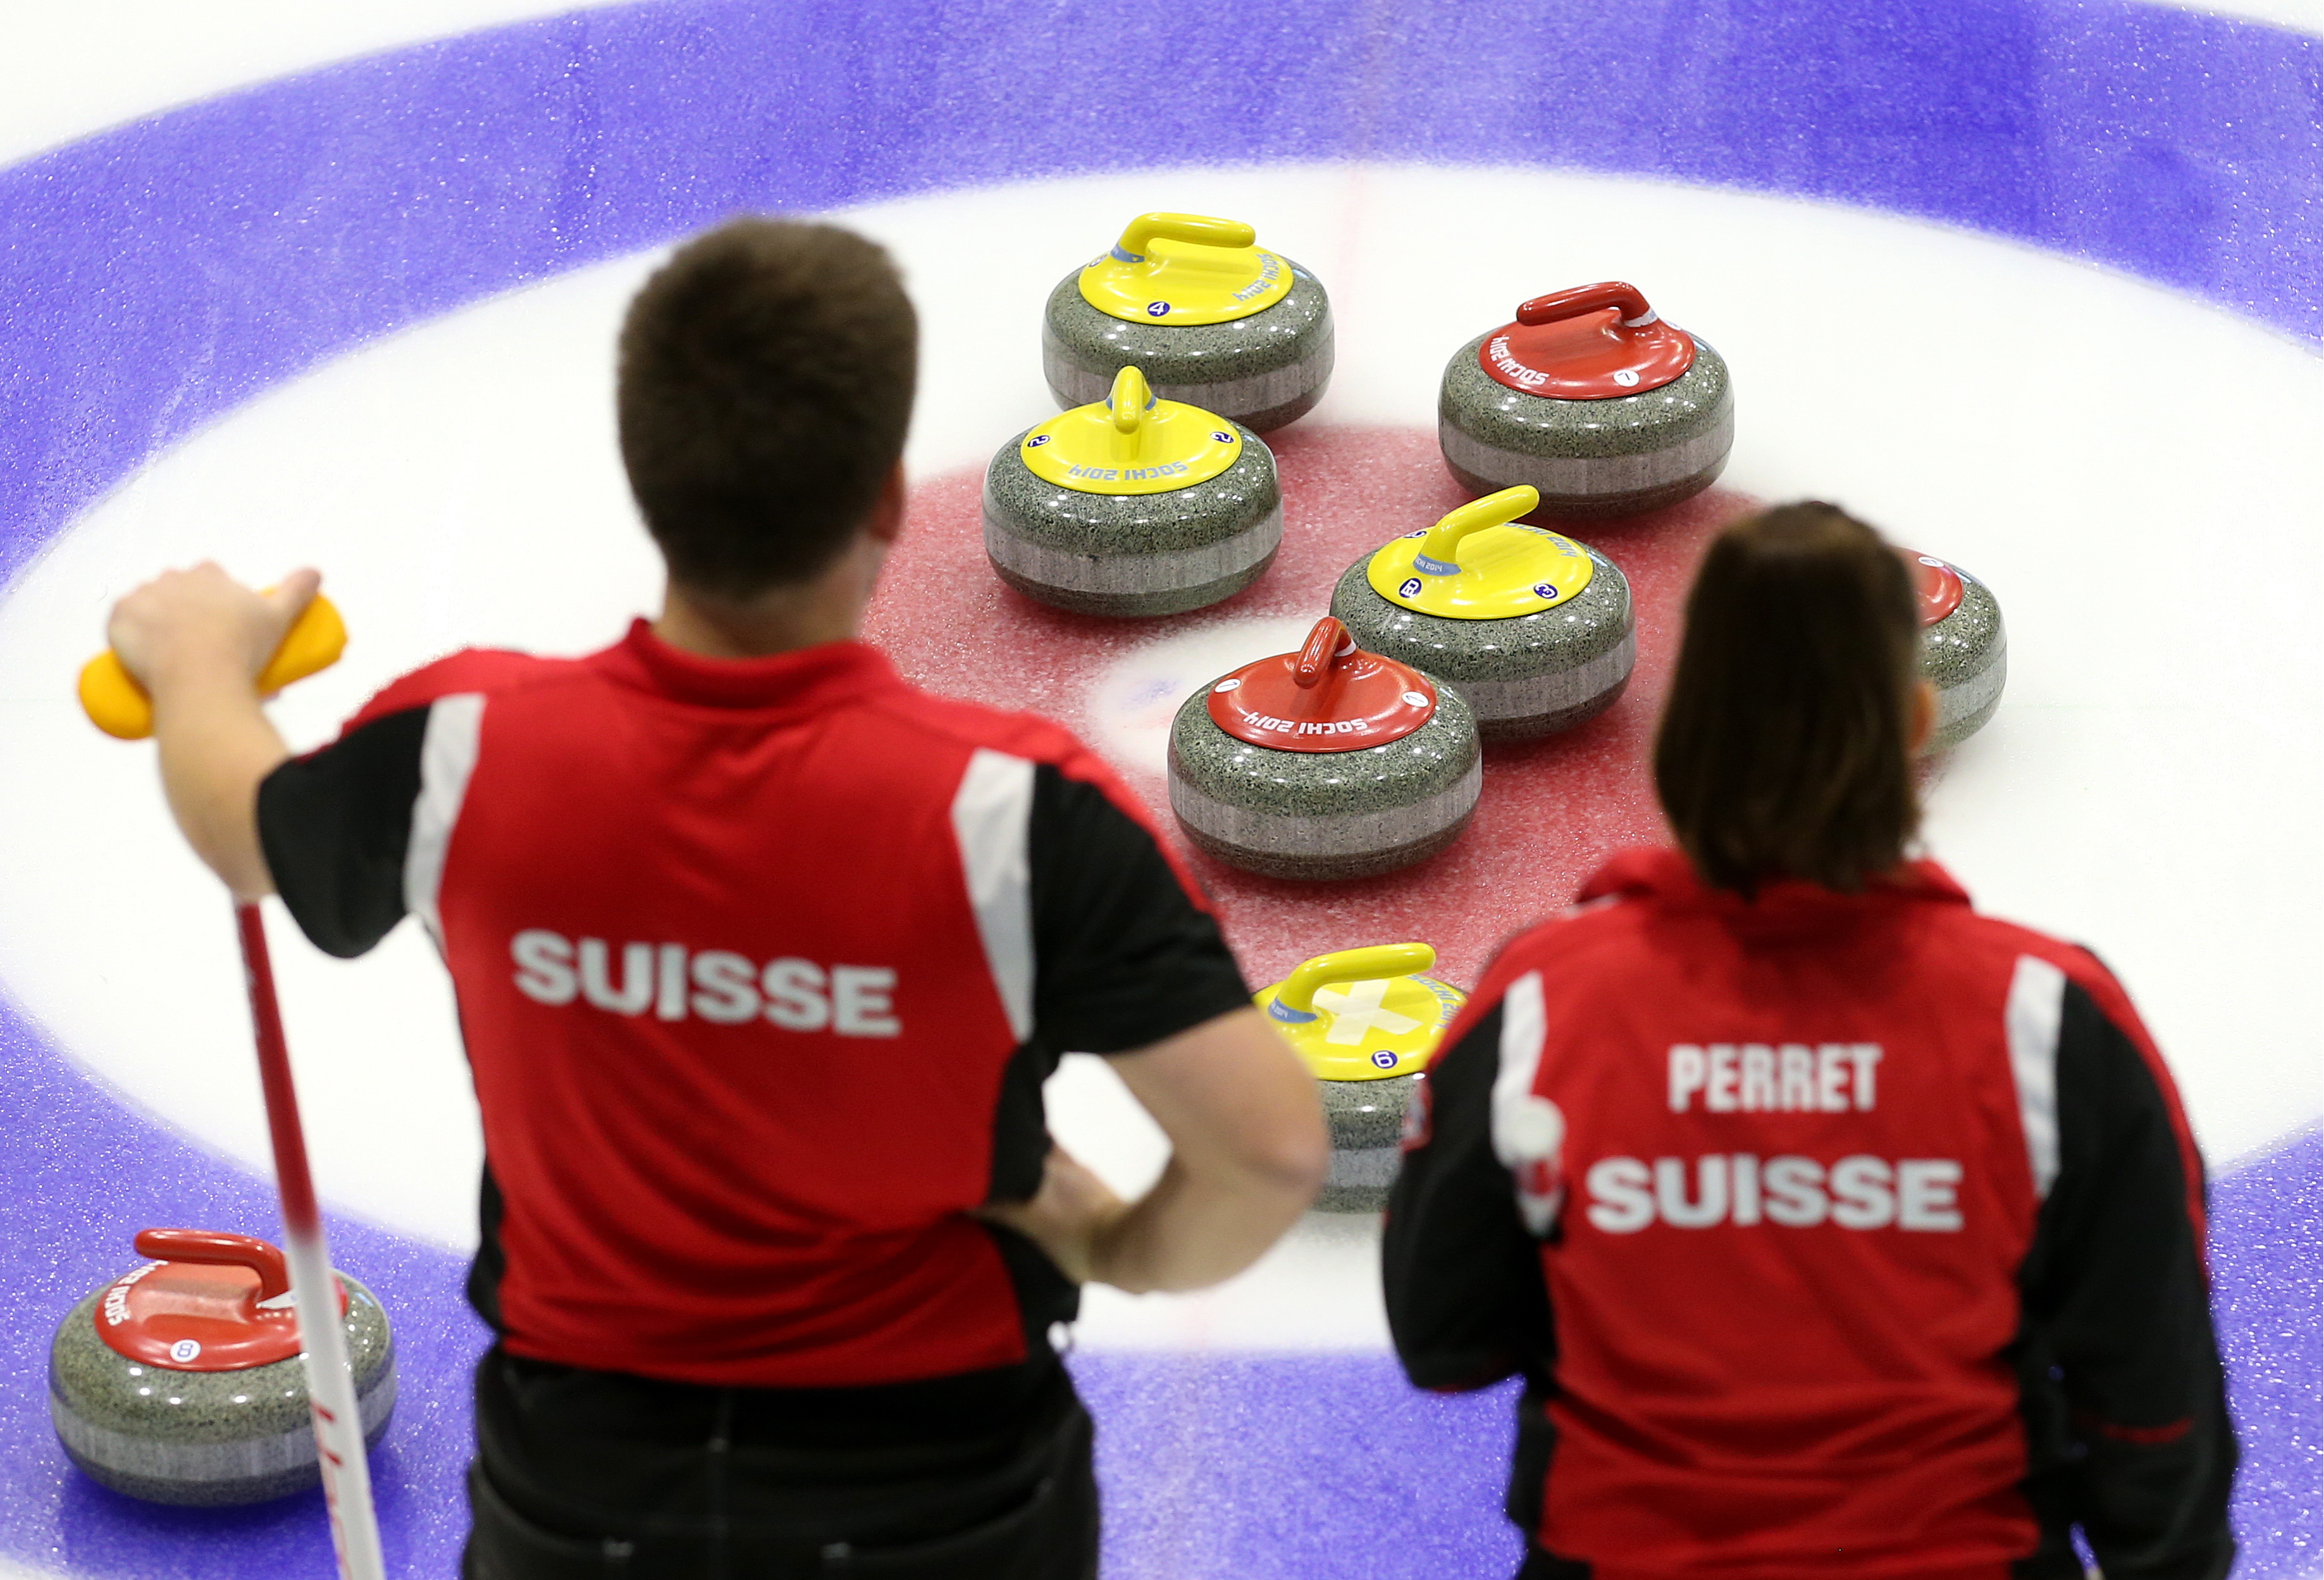 Martin Rios (L) and Jenny Perret of Team Perret (Glarus, Switzerland) in a match against Team Moskaleva (Dmitrov, Russia) at International Mixed Doubles Sochi 2017, an event of the 2017-2018 World Mixed Doubles Curling Tour, at the Ice Cube Curling Center. (Photo by Valery Sharifulin—TASS/Getty Images:)